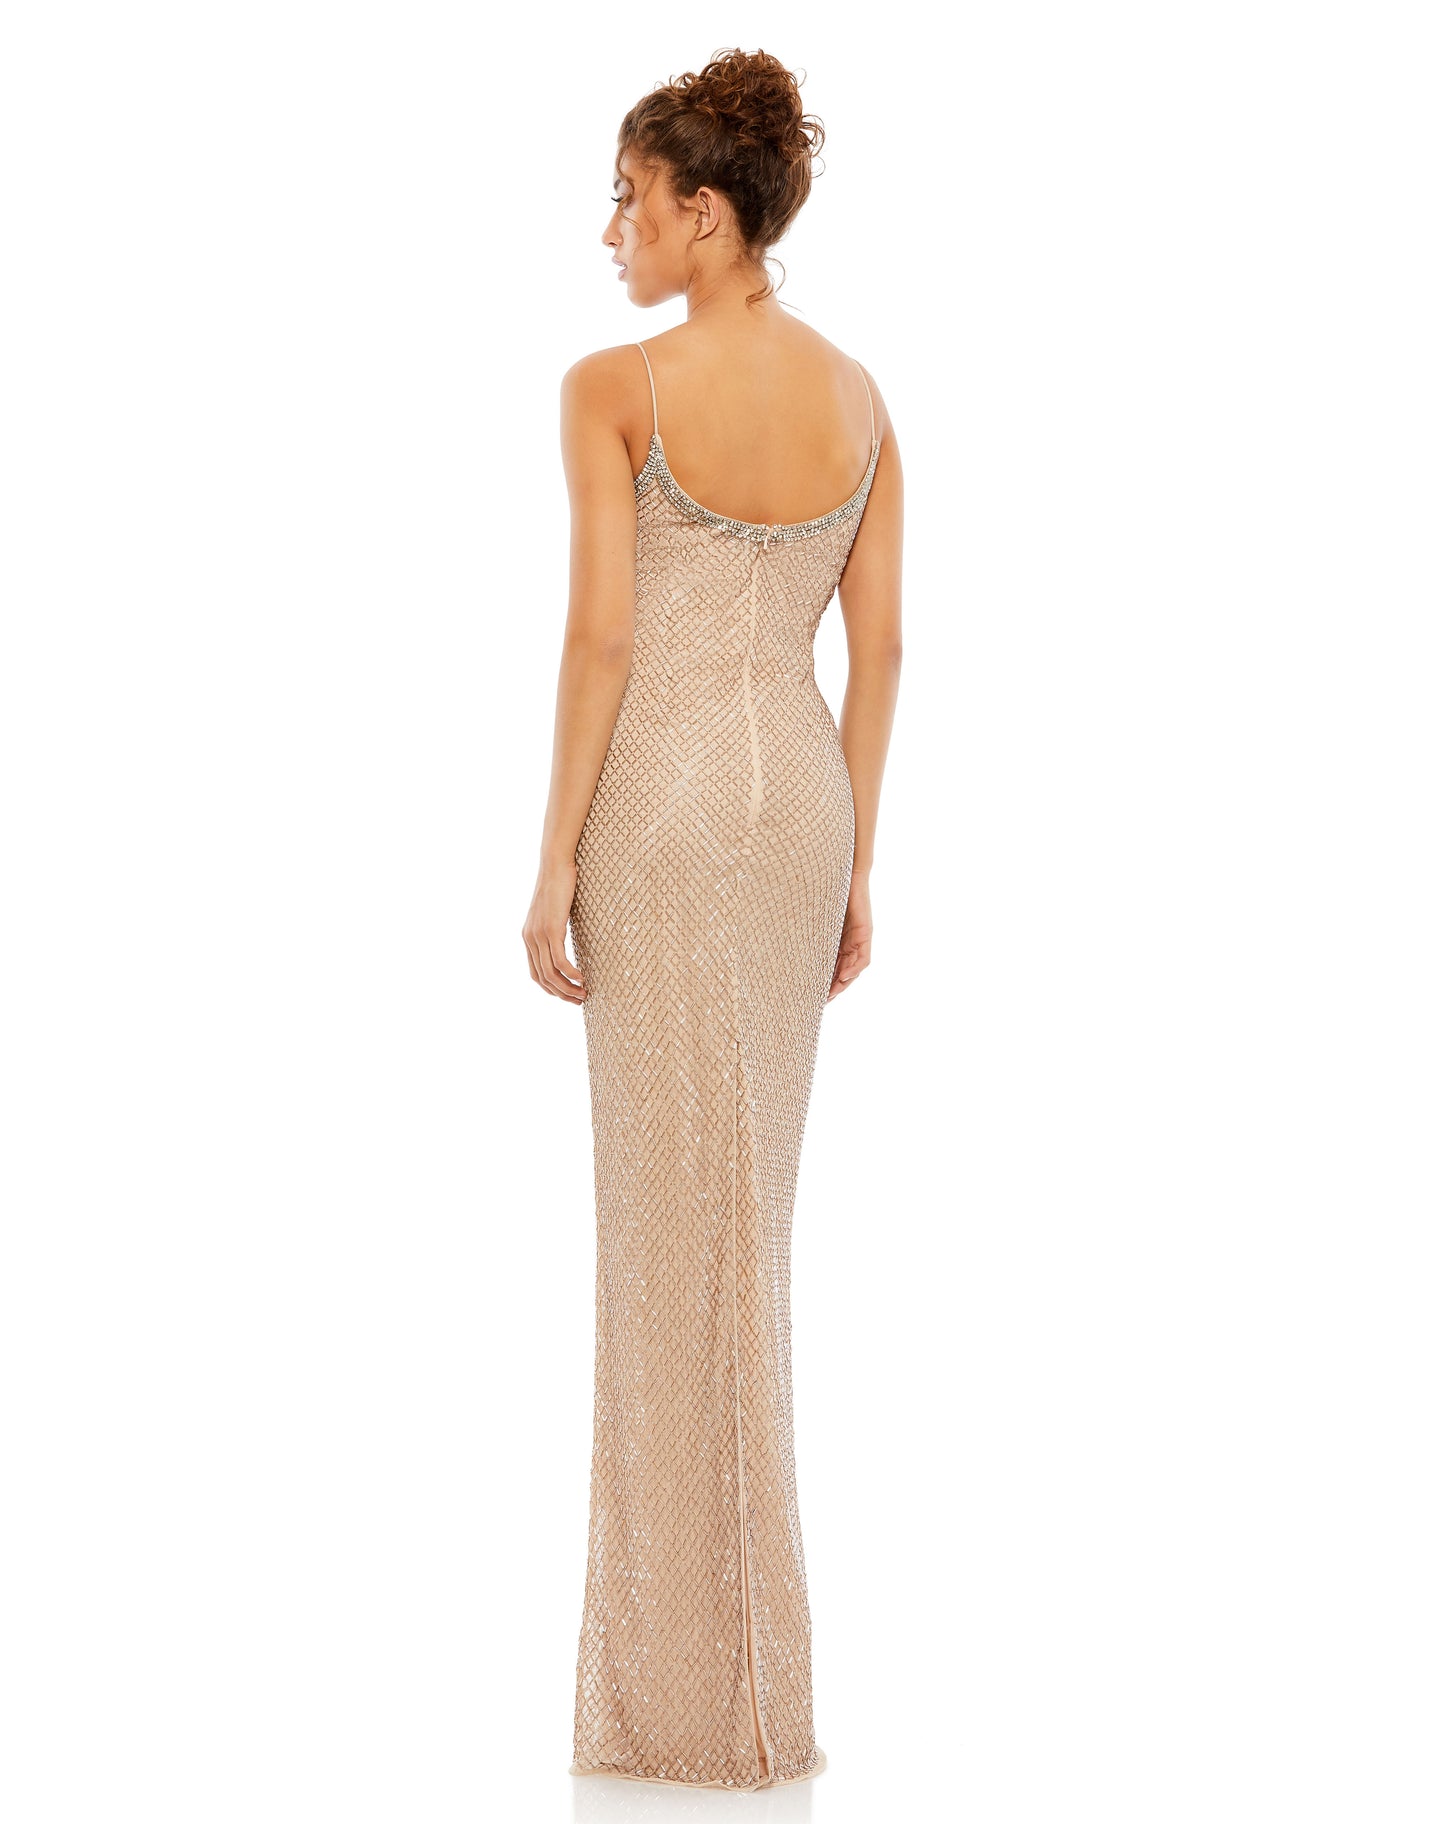 Formal Dresses Long Formal Spaghetti Strap Gown Nude